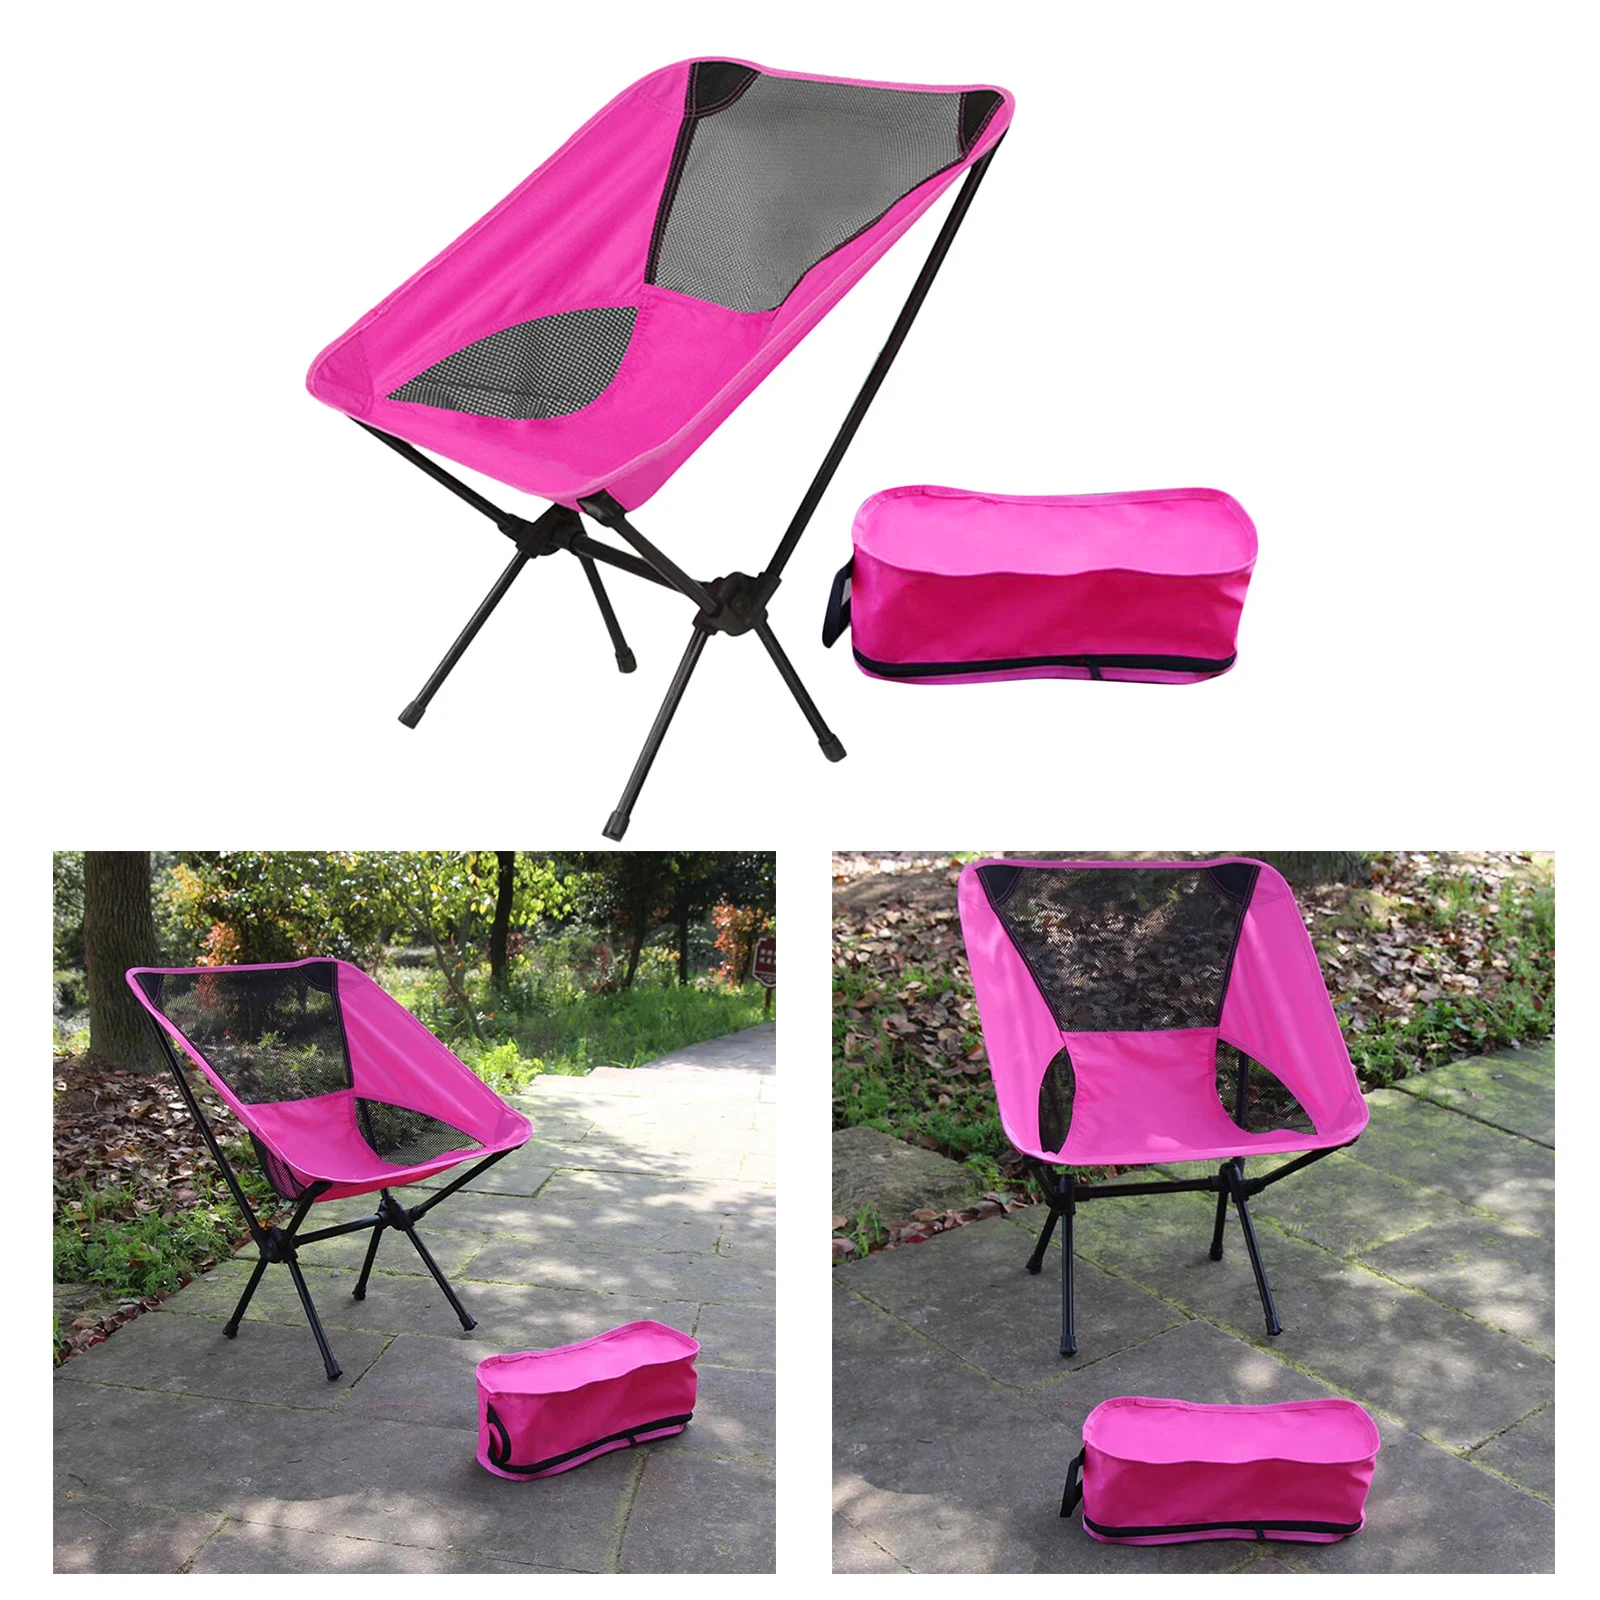 Portable Folding Chair Camping Fishing Stool Outdoor Travel Beach Seat